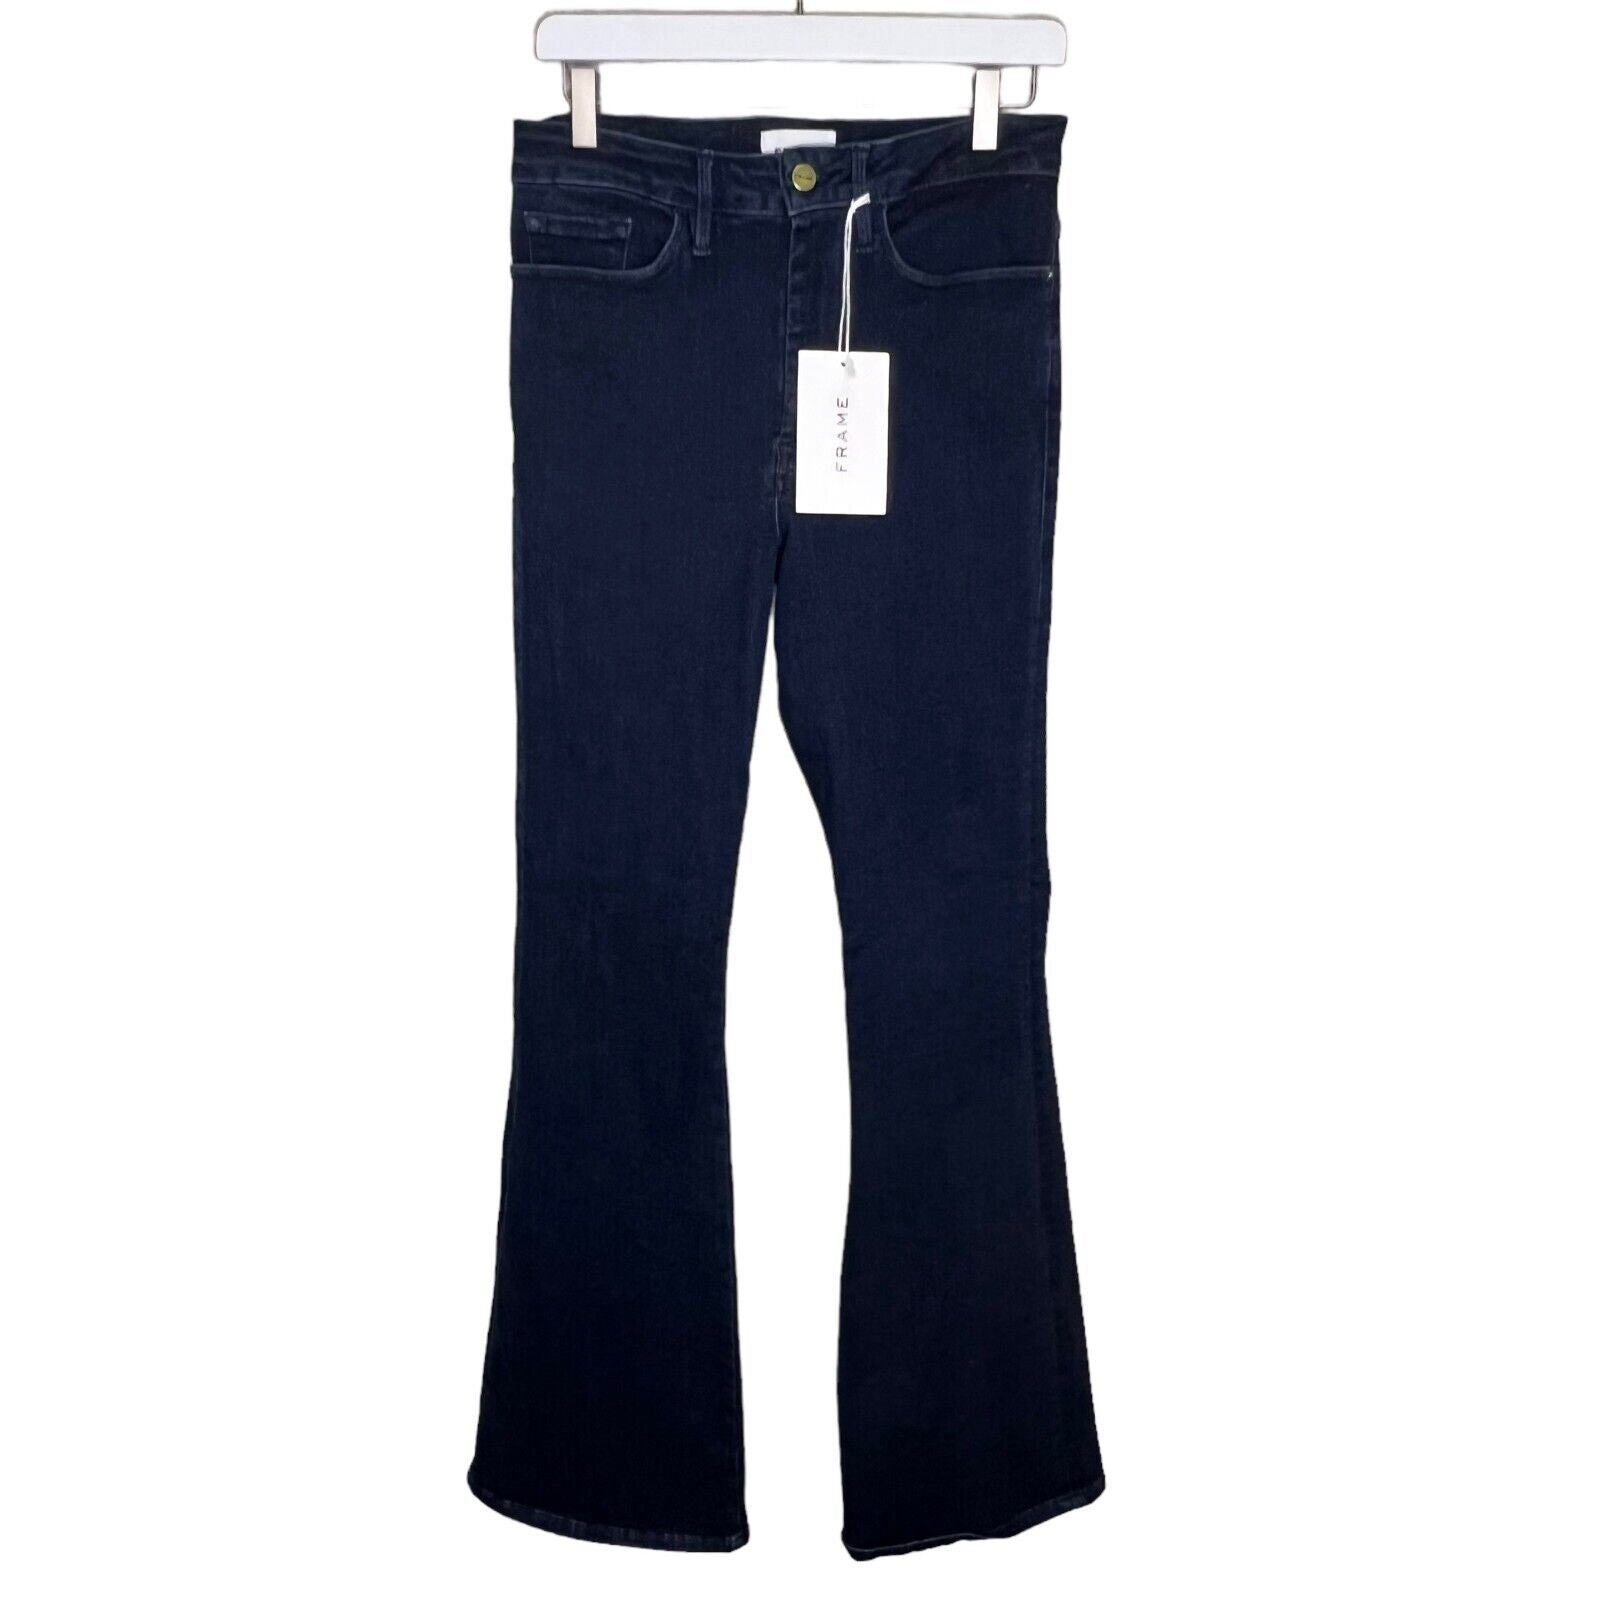 FRAME Le One High-Rise Flare Jeans Size 2 (29-34) NEW $238